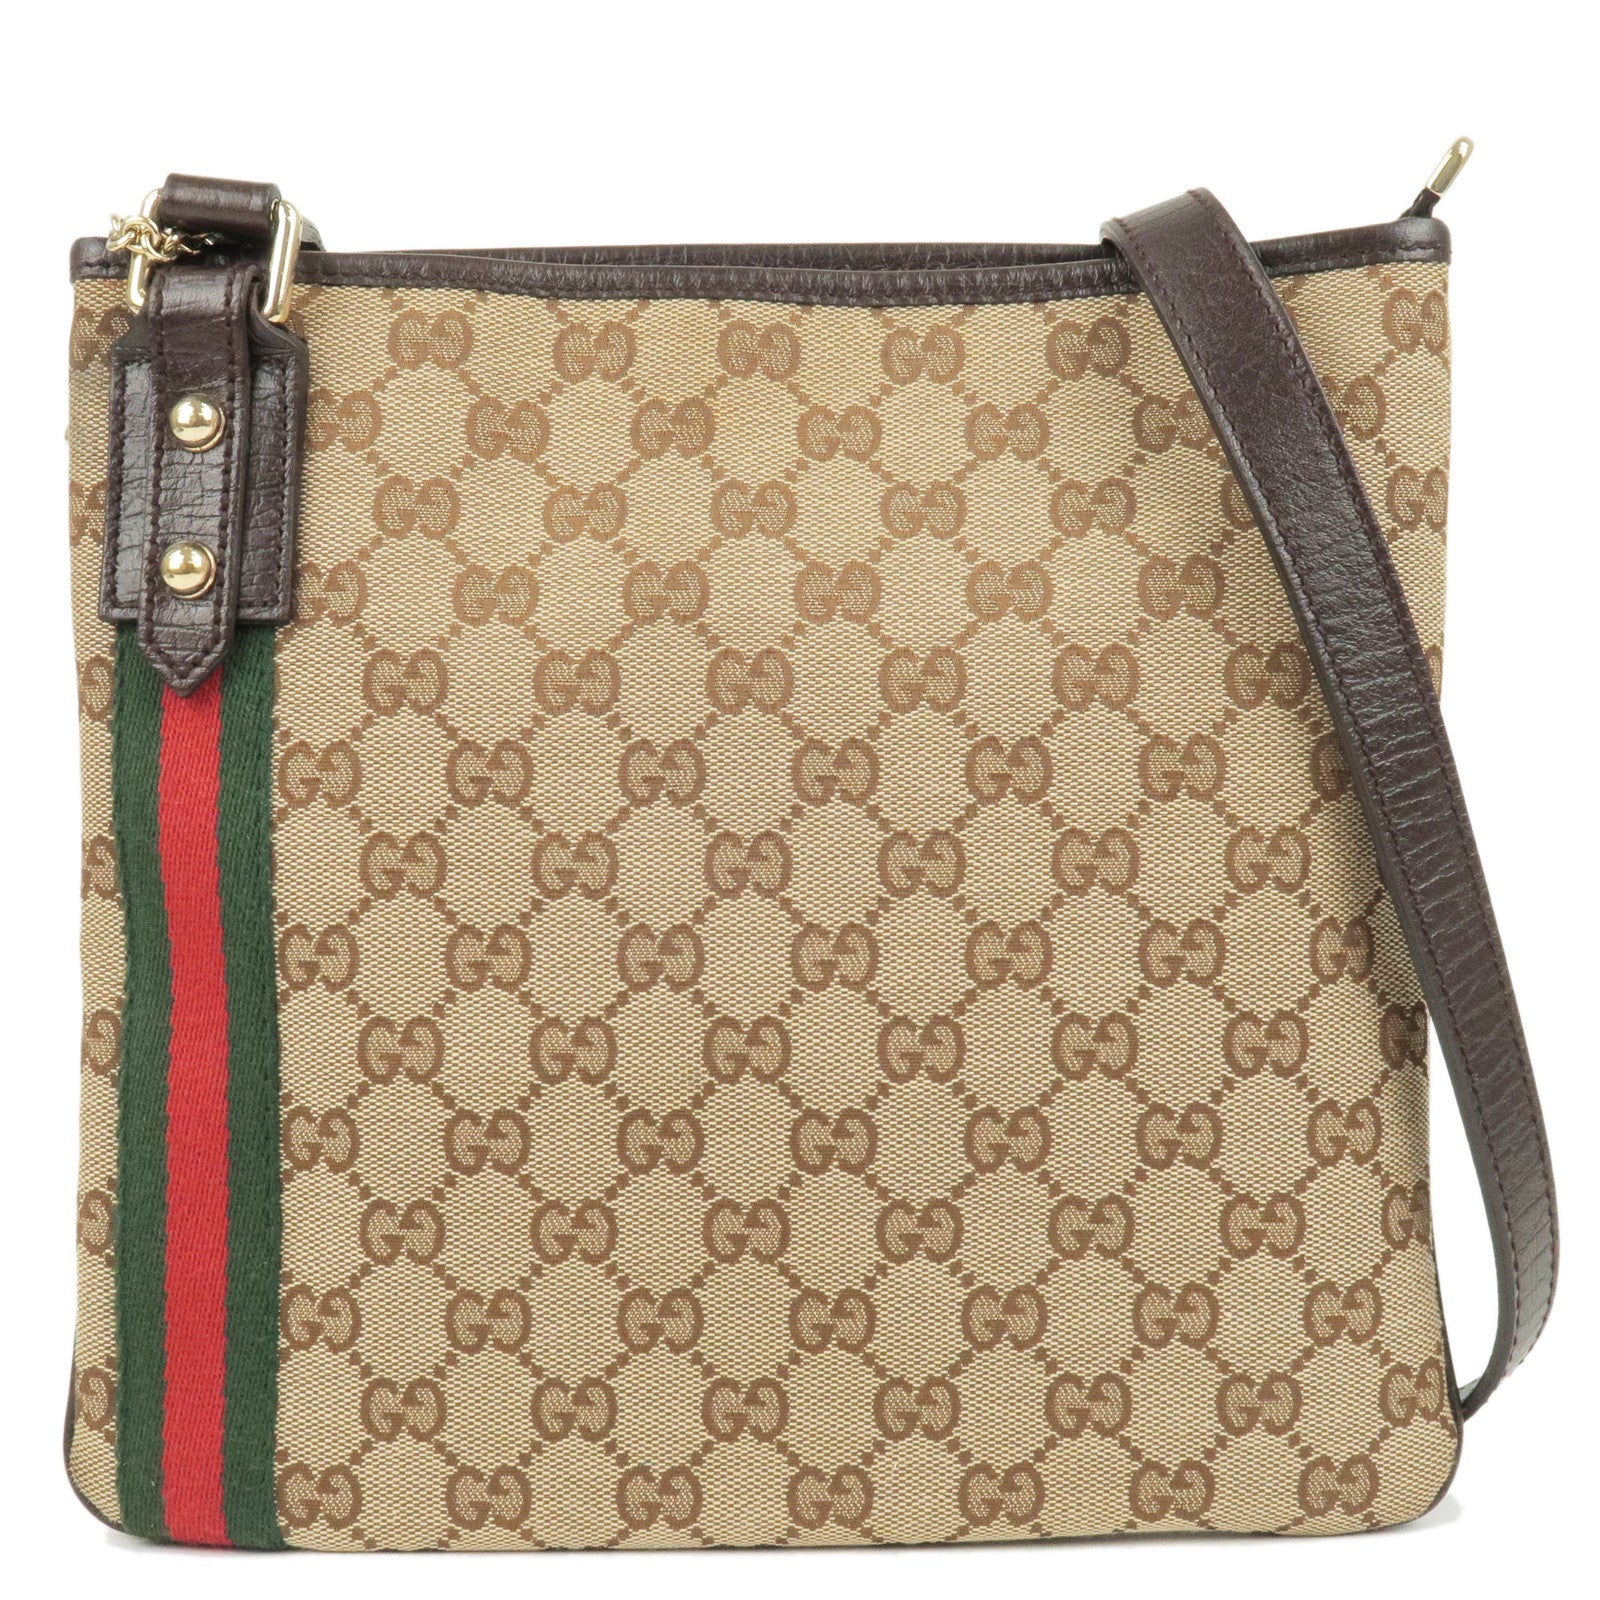 Gucci Kids Bags - Shop Gucci Bags For Kids